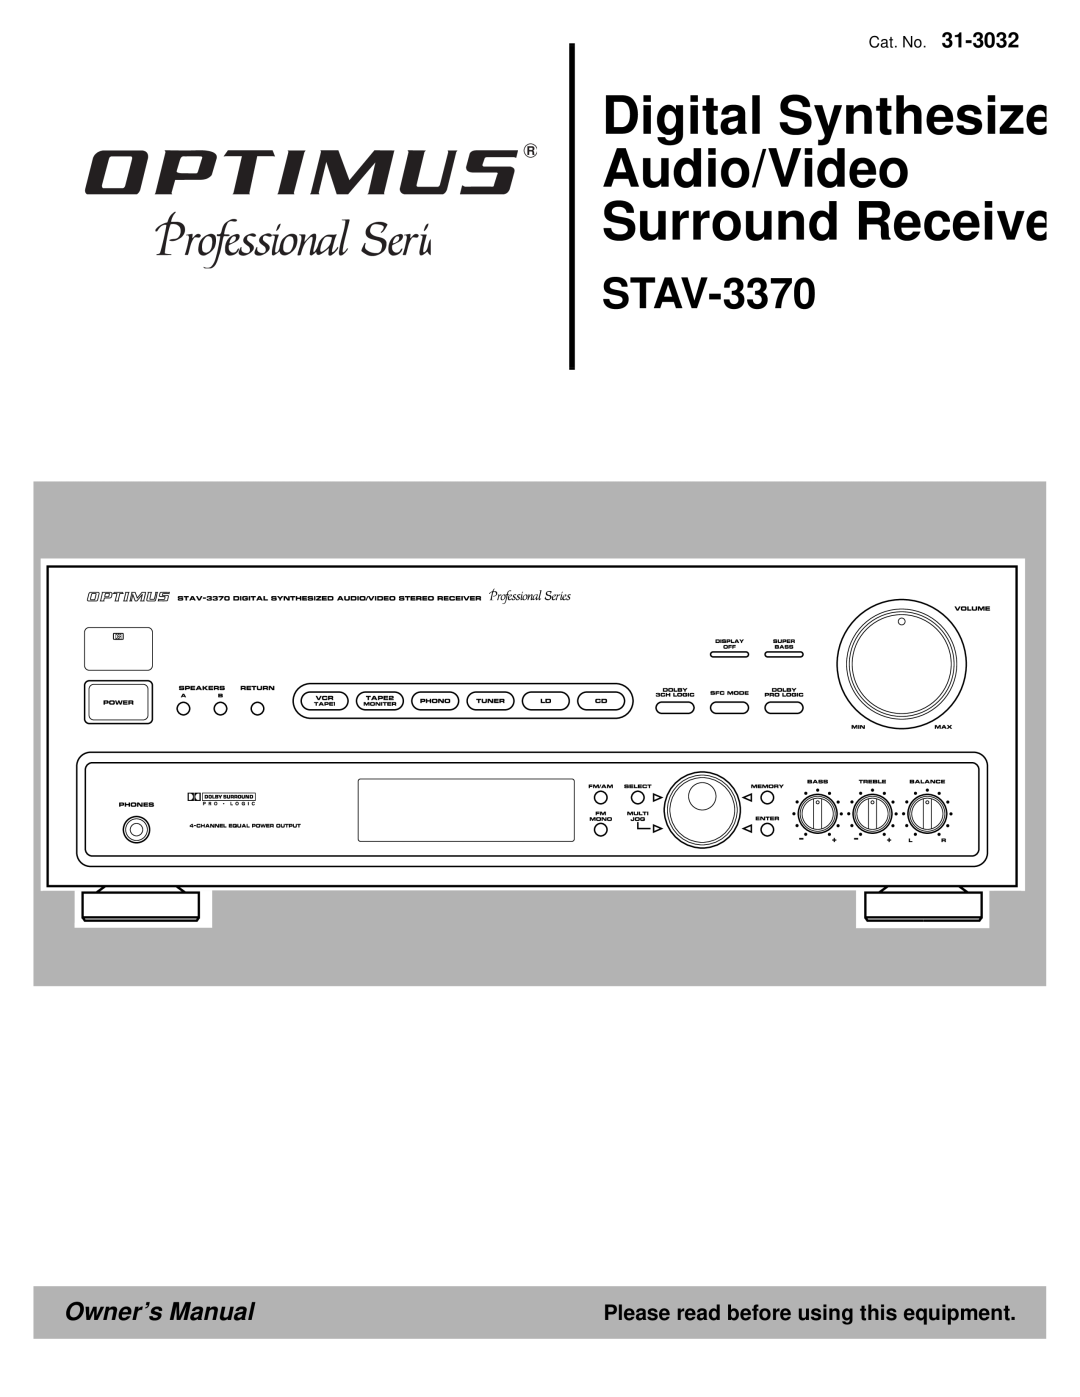 Optimus STAV-3370 owner manual Please read before using this equipment, Digital Synthesize Audio/Video Surround Receive 